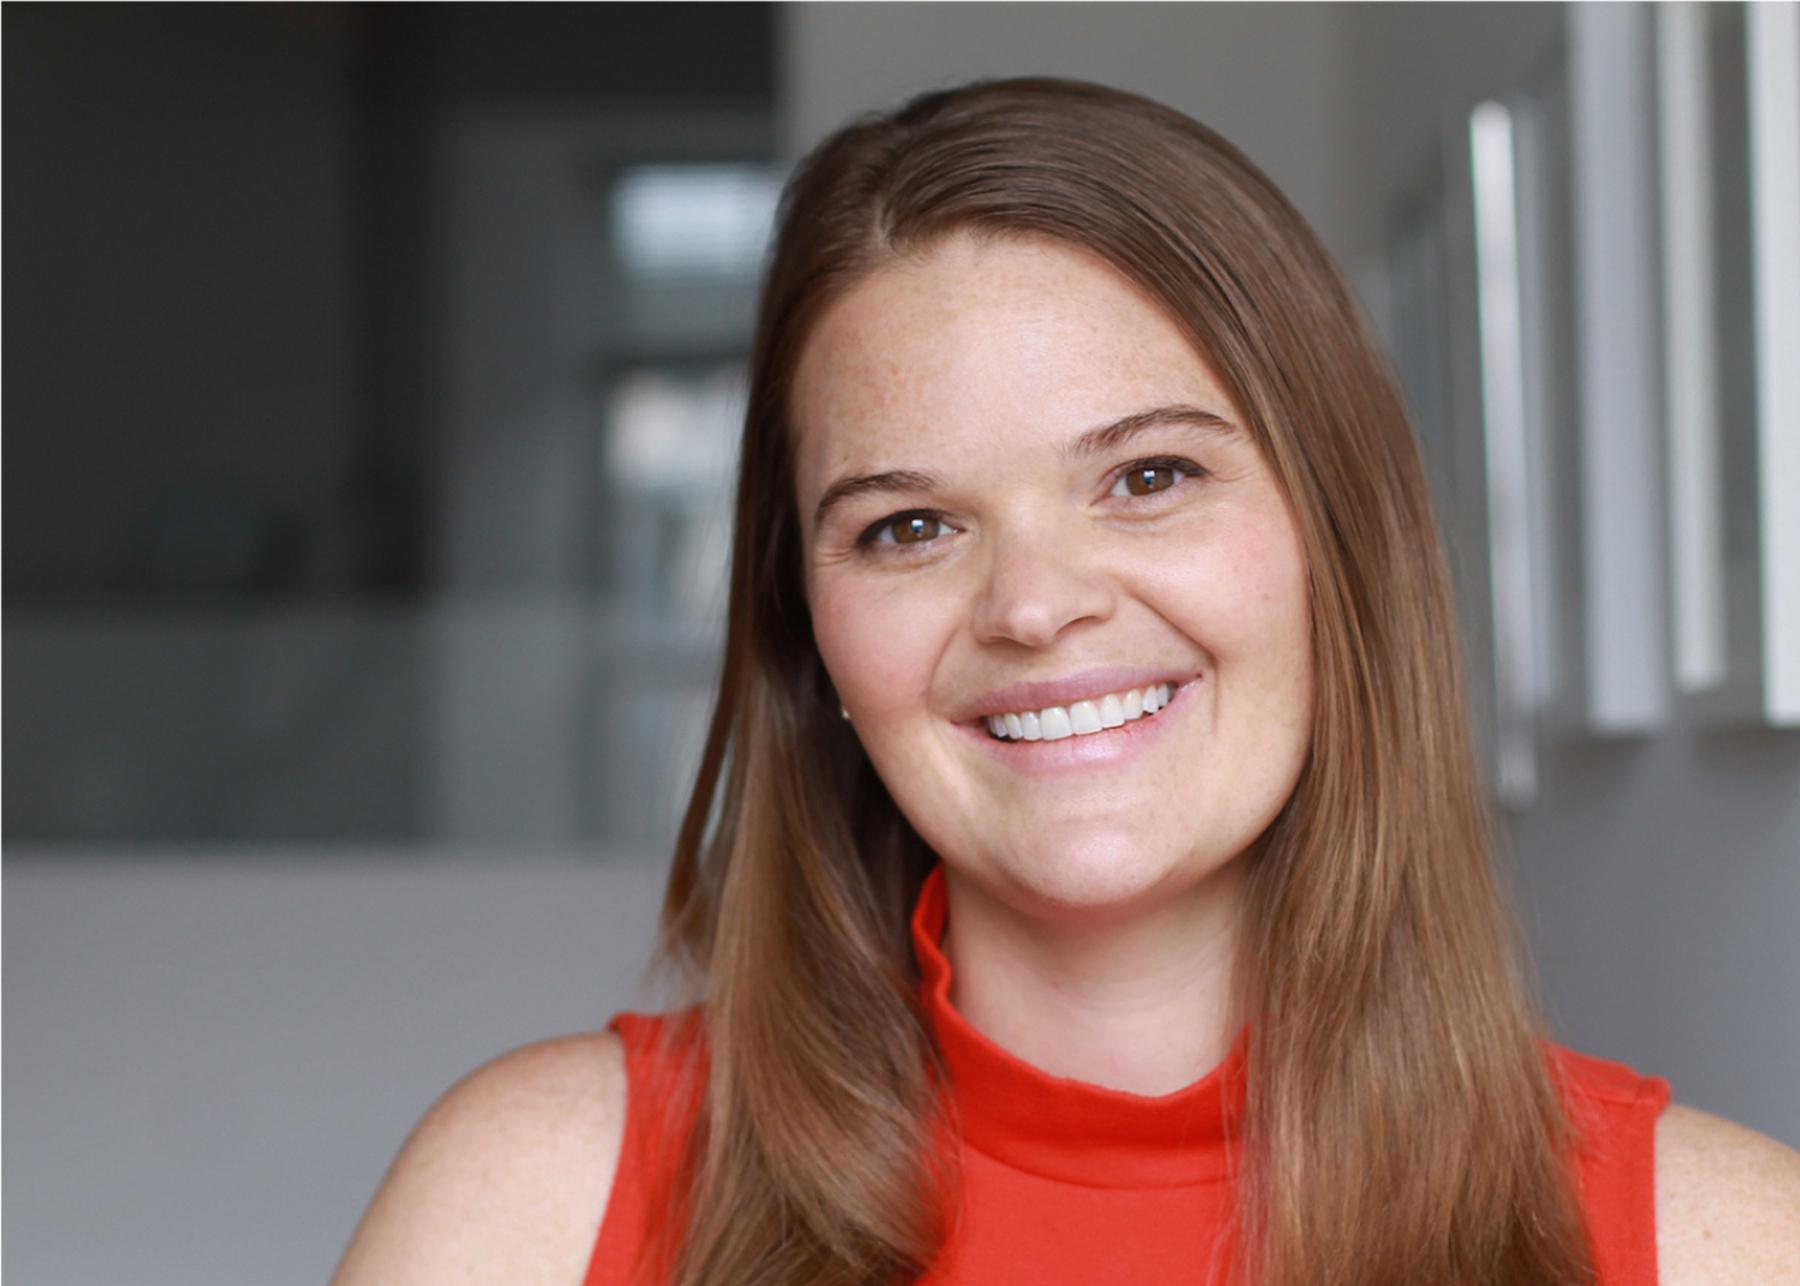 Jordan Fischer leads the global compliance and regulatory practice at Octillo, where she works with clients on pre- and post-incident risk mitigation around technology, security, contracts, insurance and regulation. (Photo credit: Octillo)